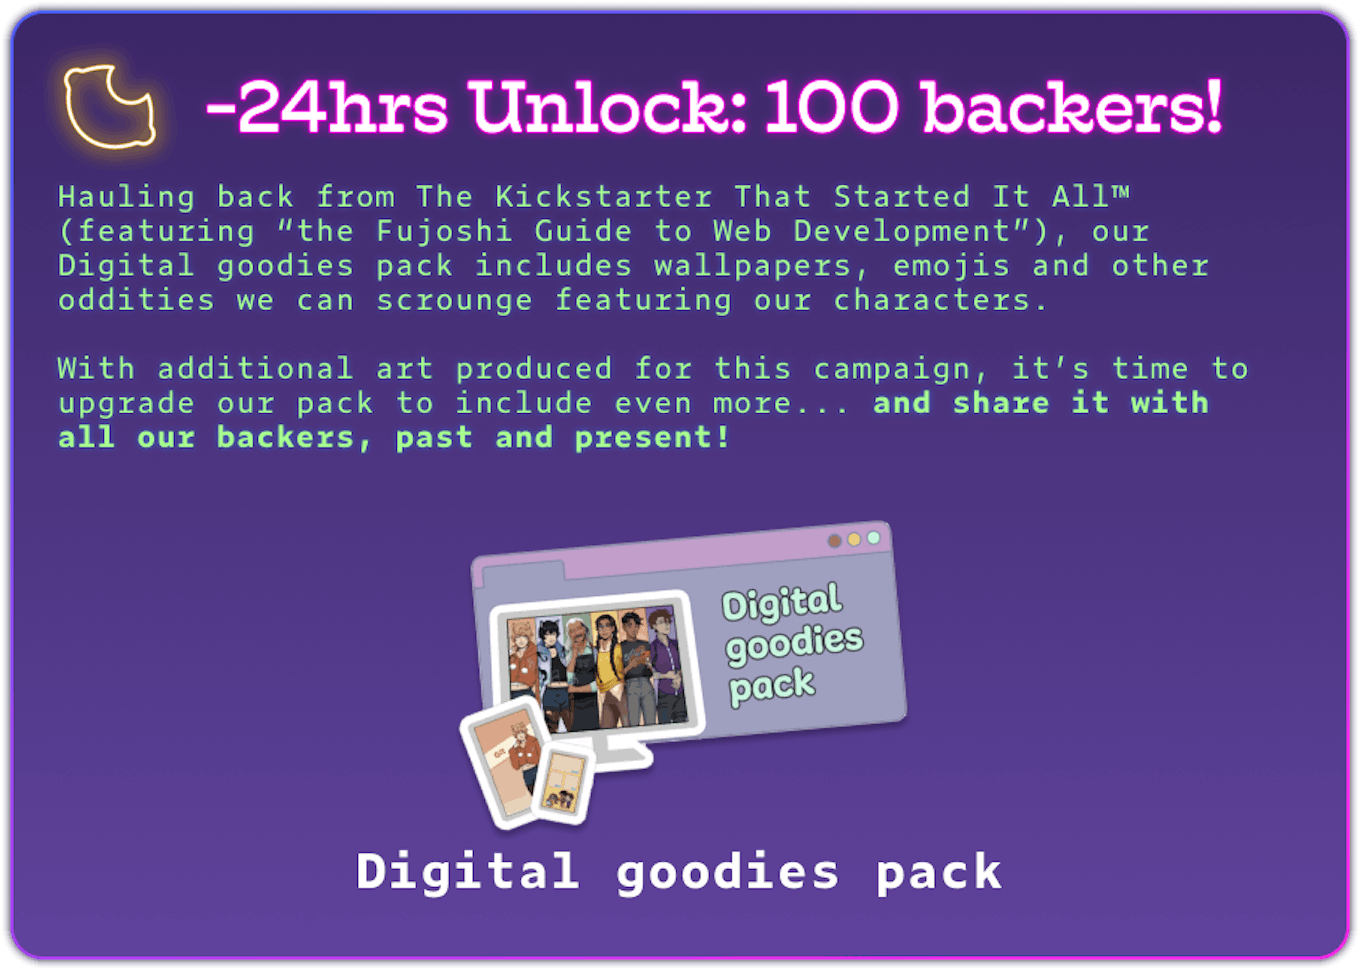 -24hrs Unlock: 100 backers! Hauling back from The Kickstarter That Started It All™ (featuring “the Fujoshi Guide to Web Development”), our Digital goodies pack includes wallpapers, emojis and other oddities we can scrounge featuring our characters.  With additional art produced for this campaign, it’s time to upgrade our pack to include even more... and share it with all our backers, past and present! Digital goodies pack